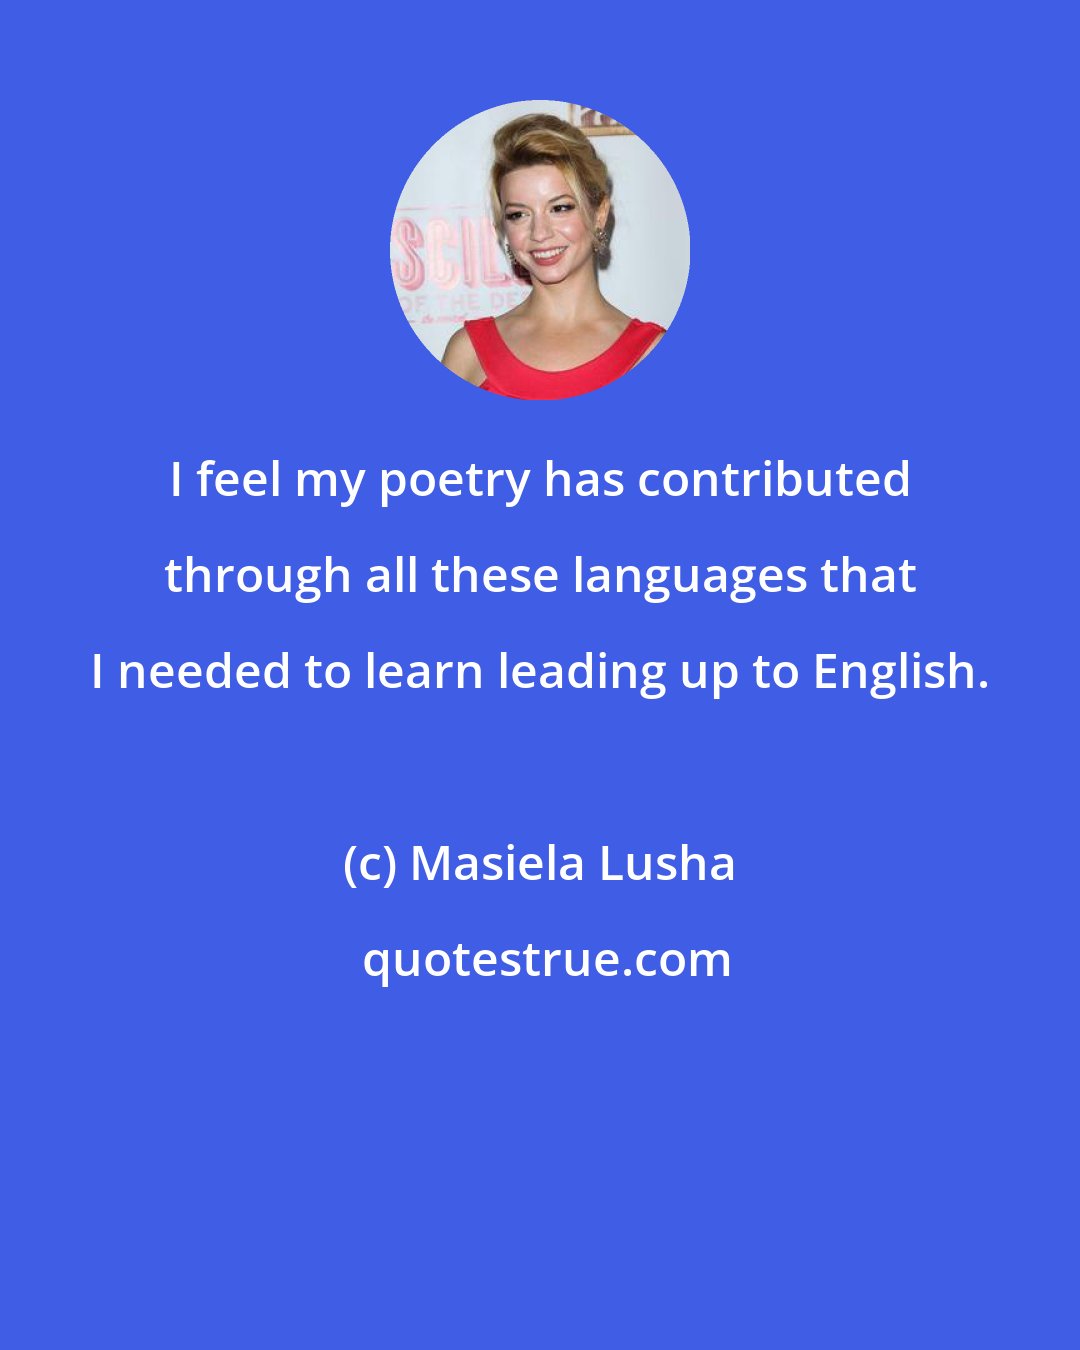 Masiela Lusha: I feel my poetry has contributed through all these languages that I needed to learn leading up to English.